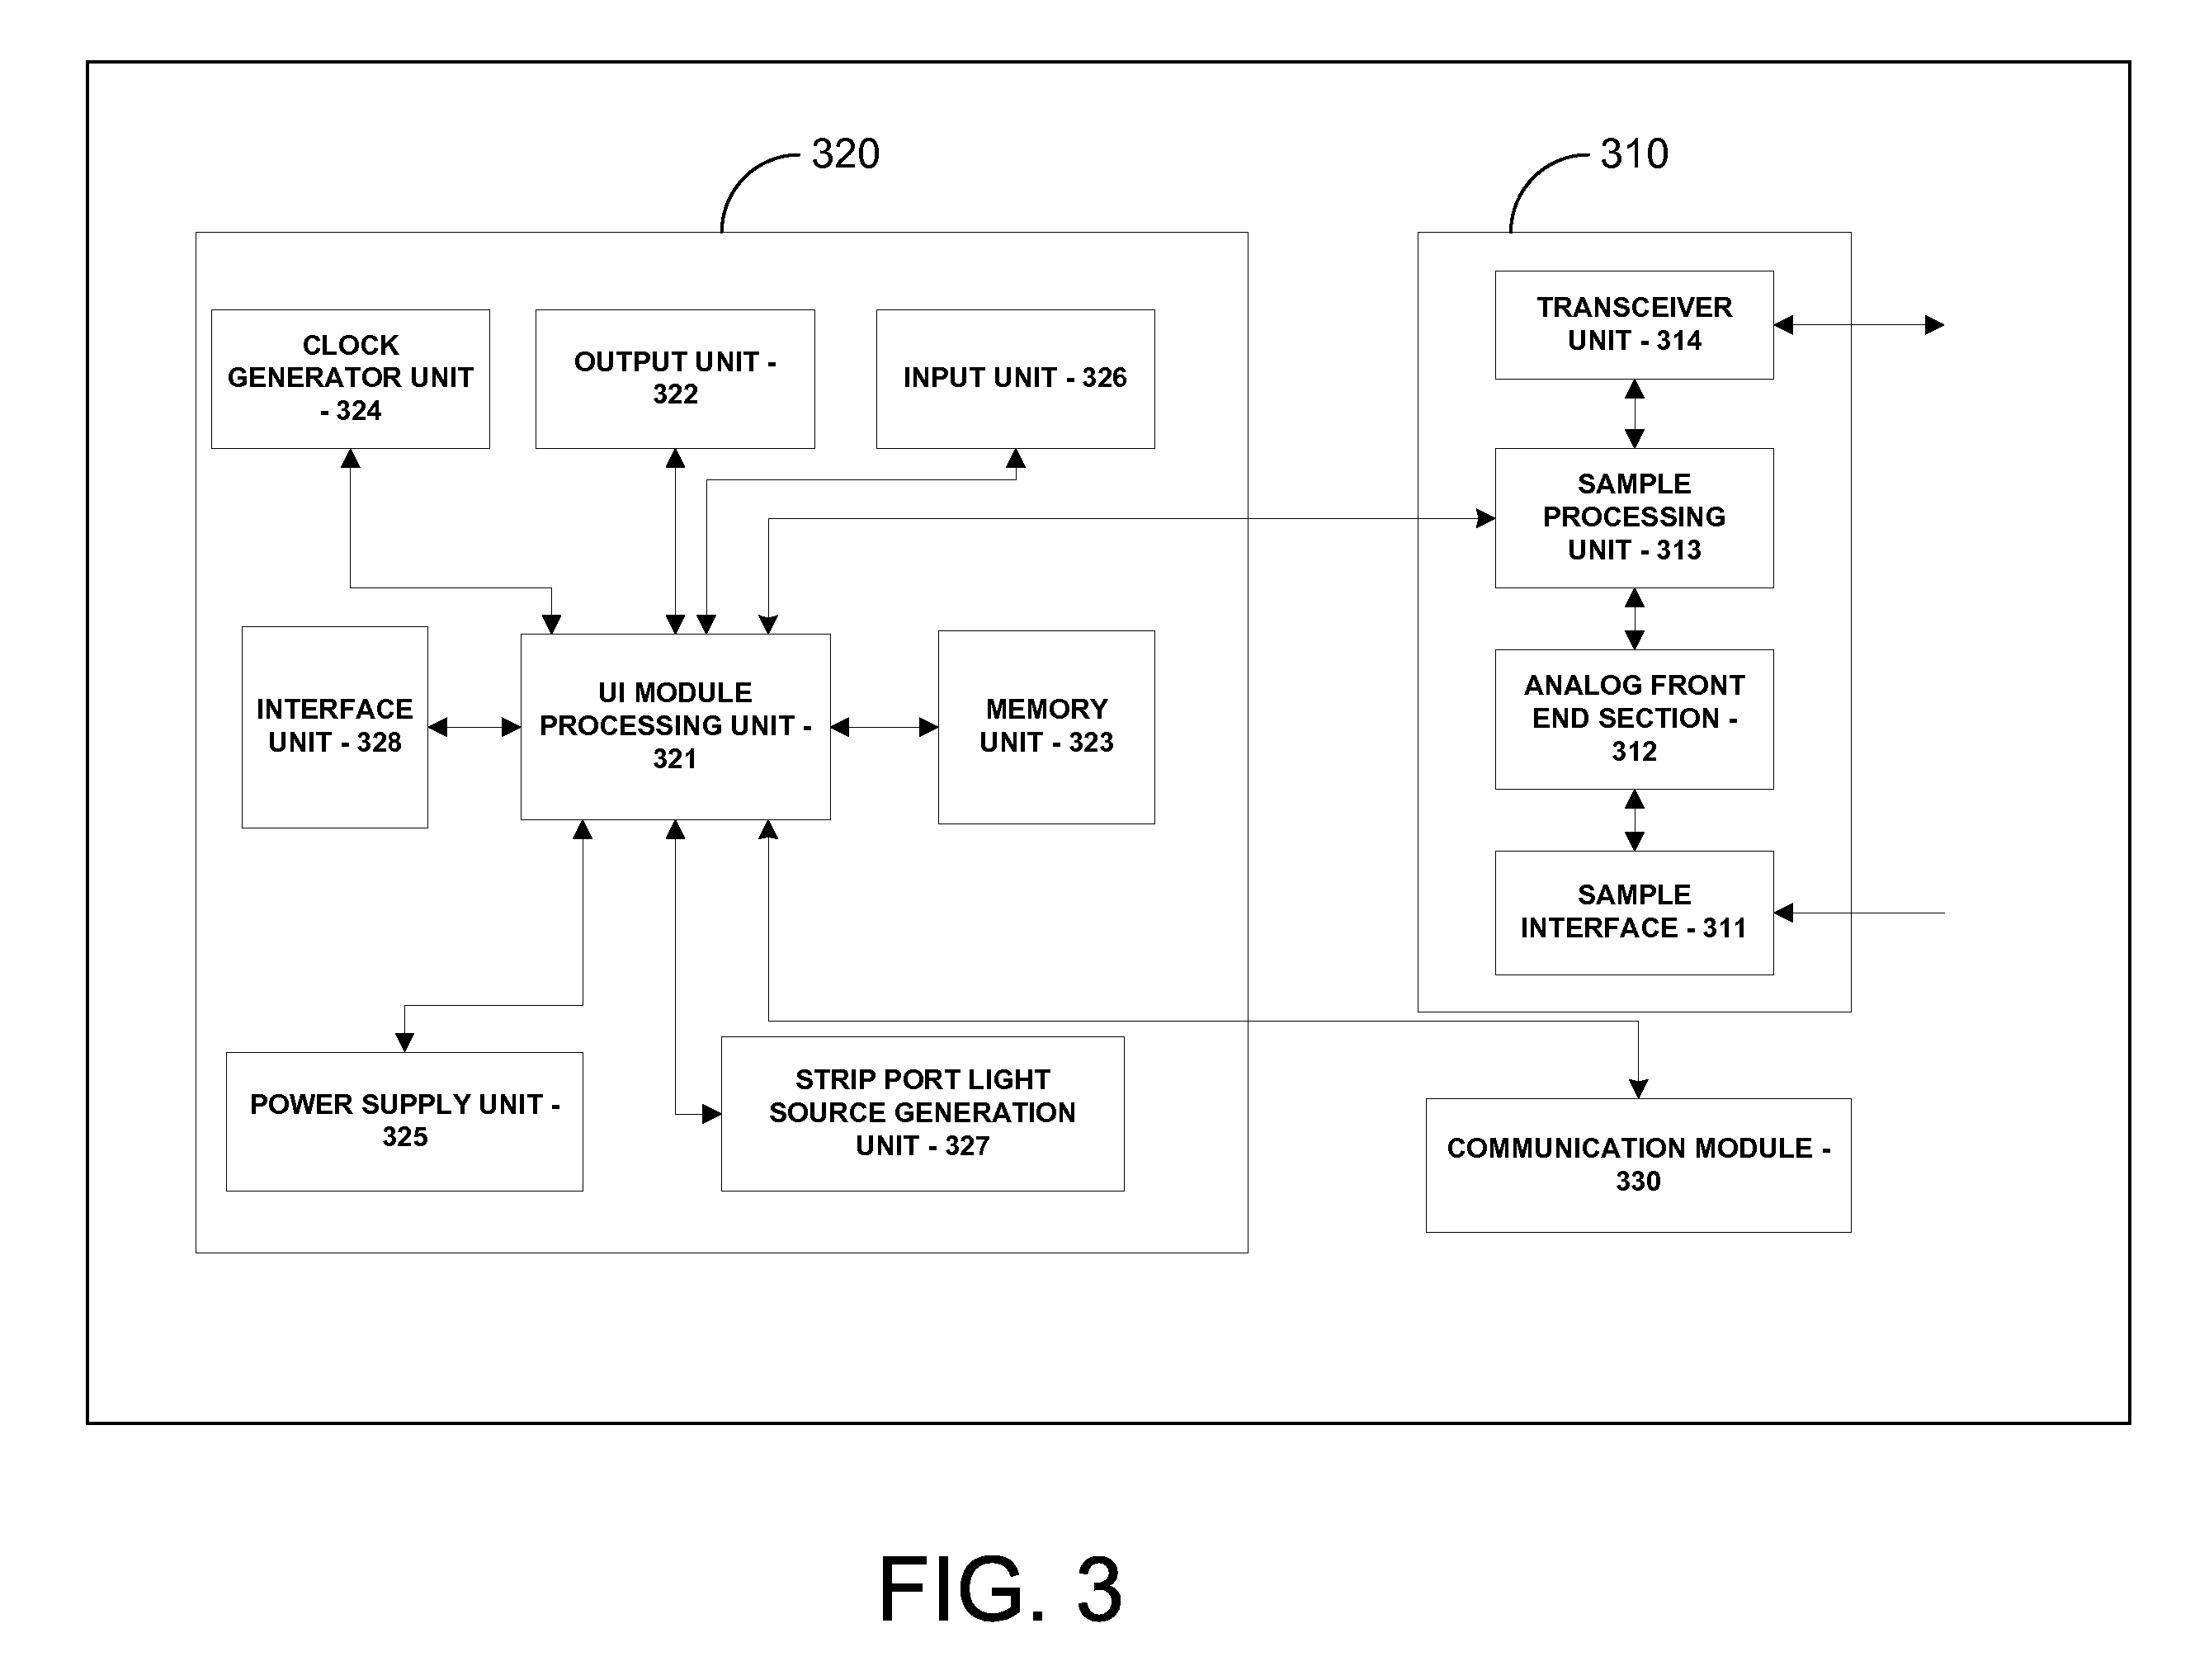 Method and System for Providing Data Management in Data Monitoring System